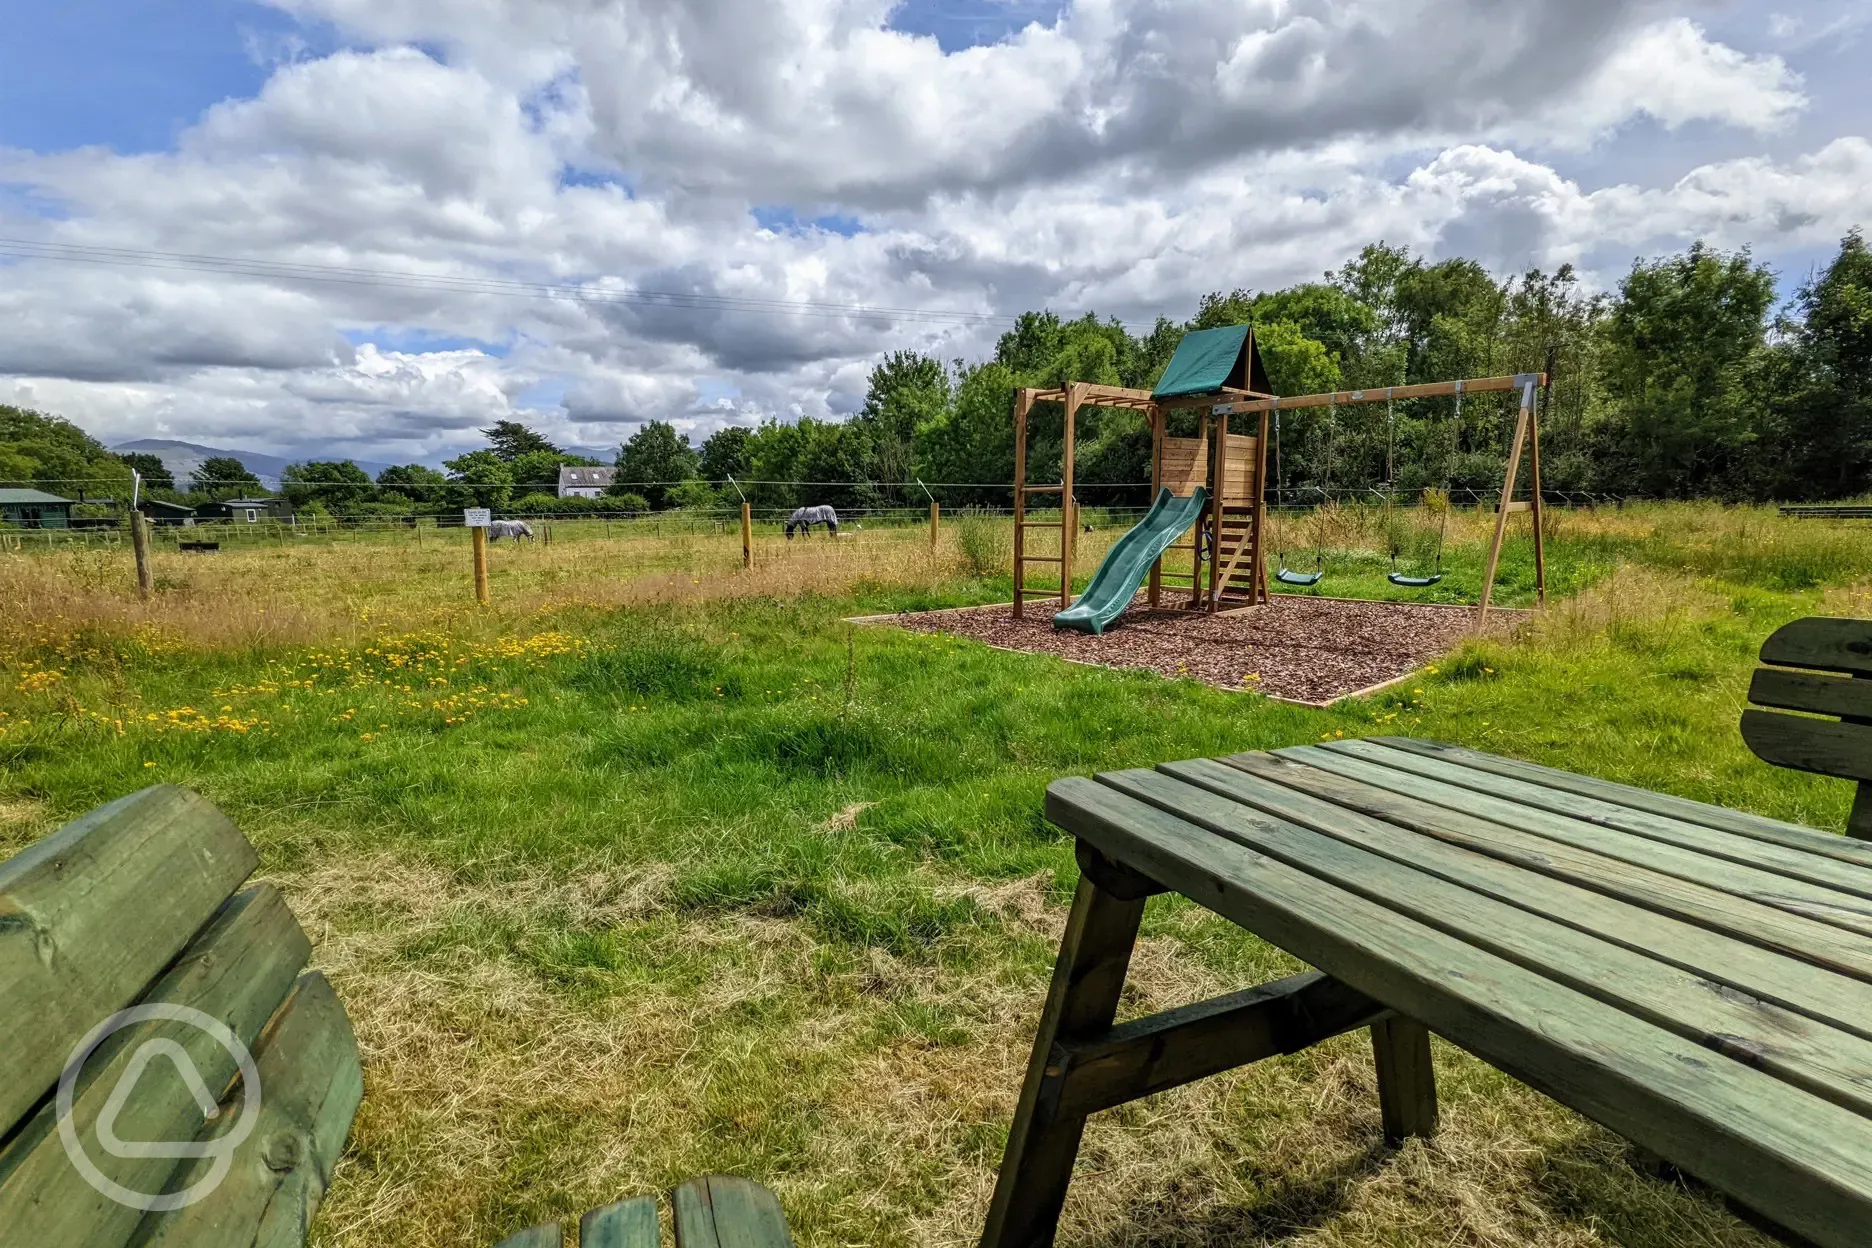 New picnic and play area